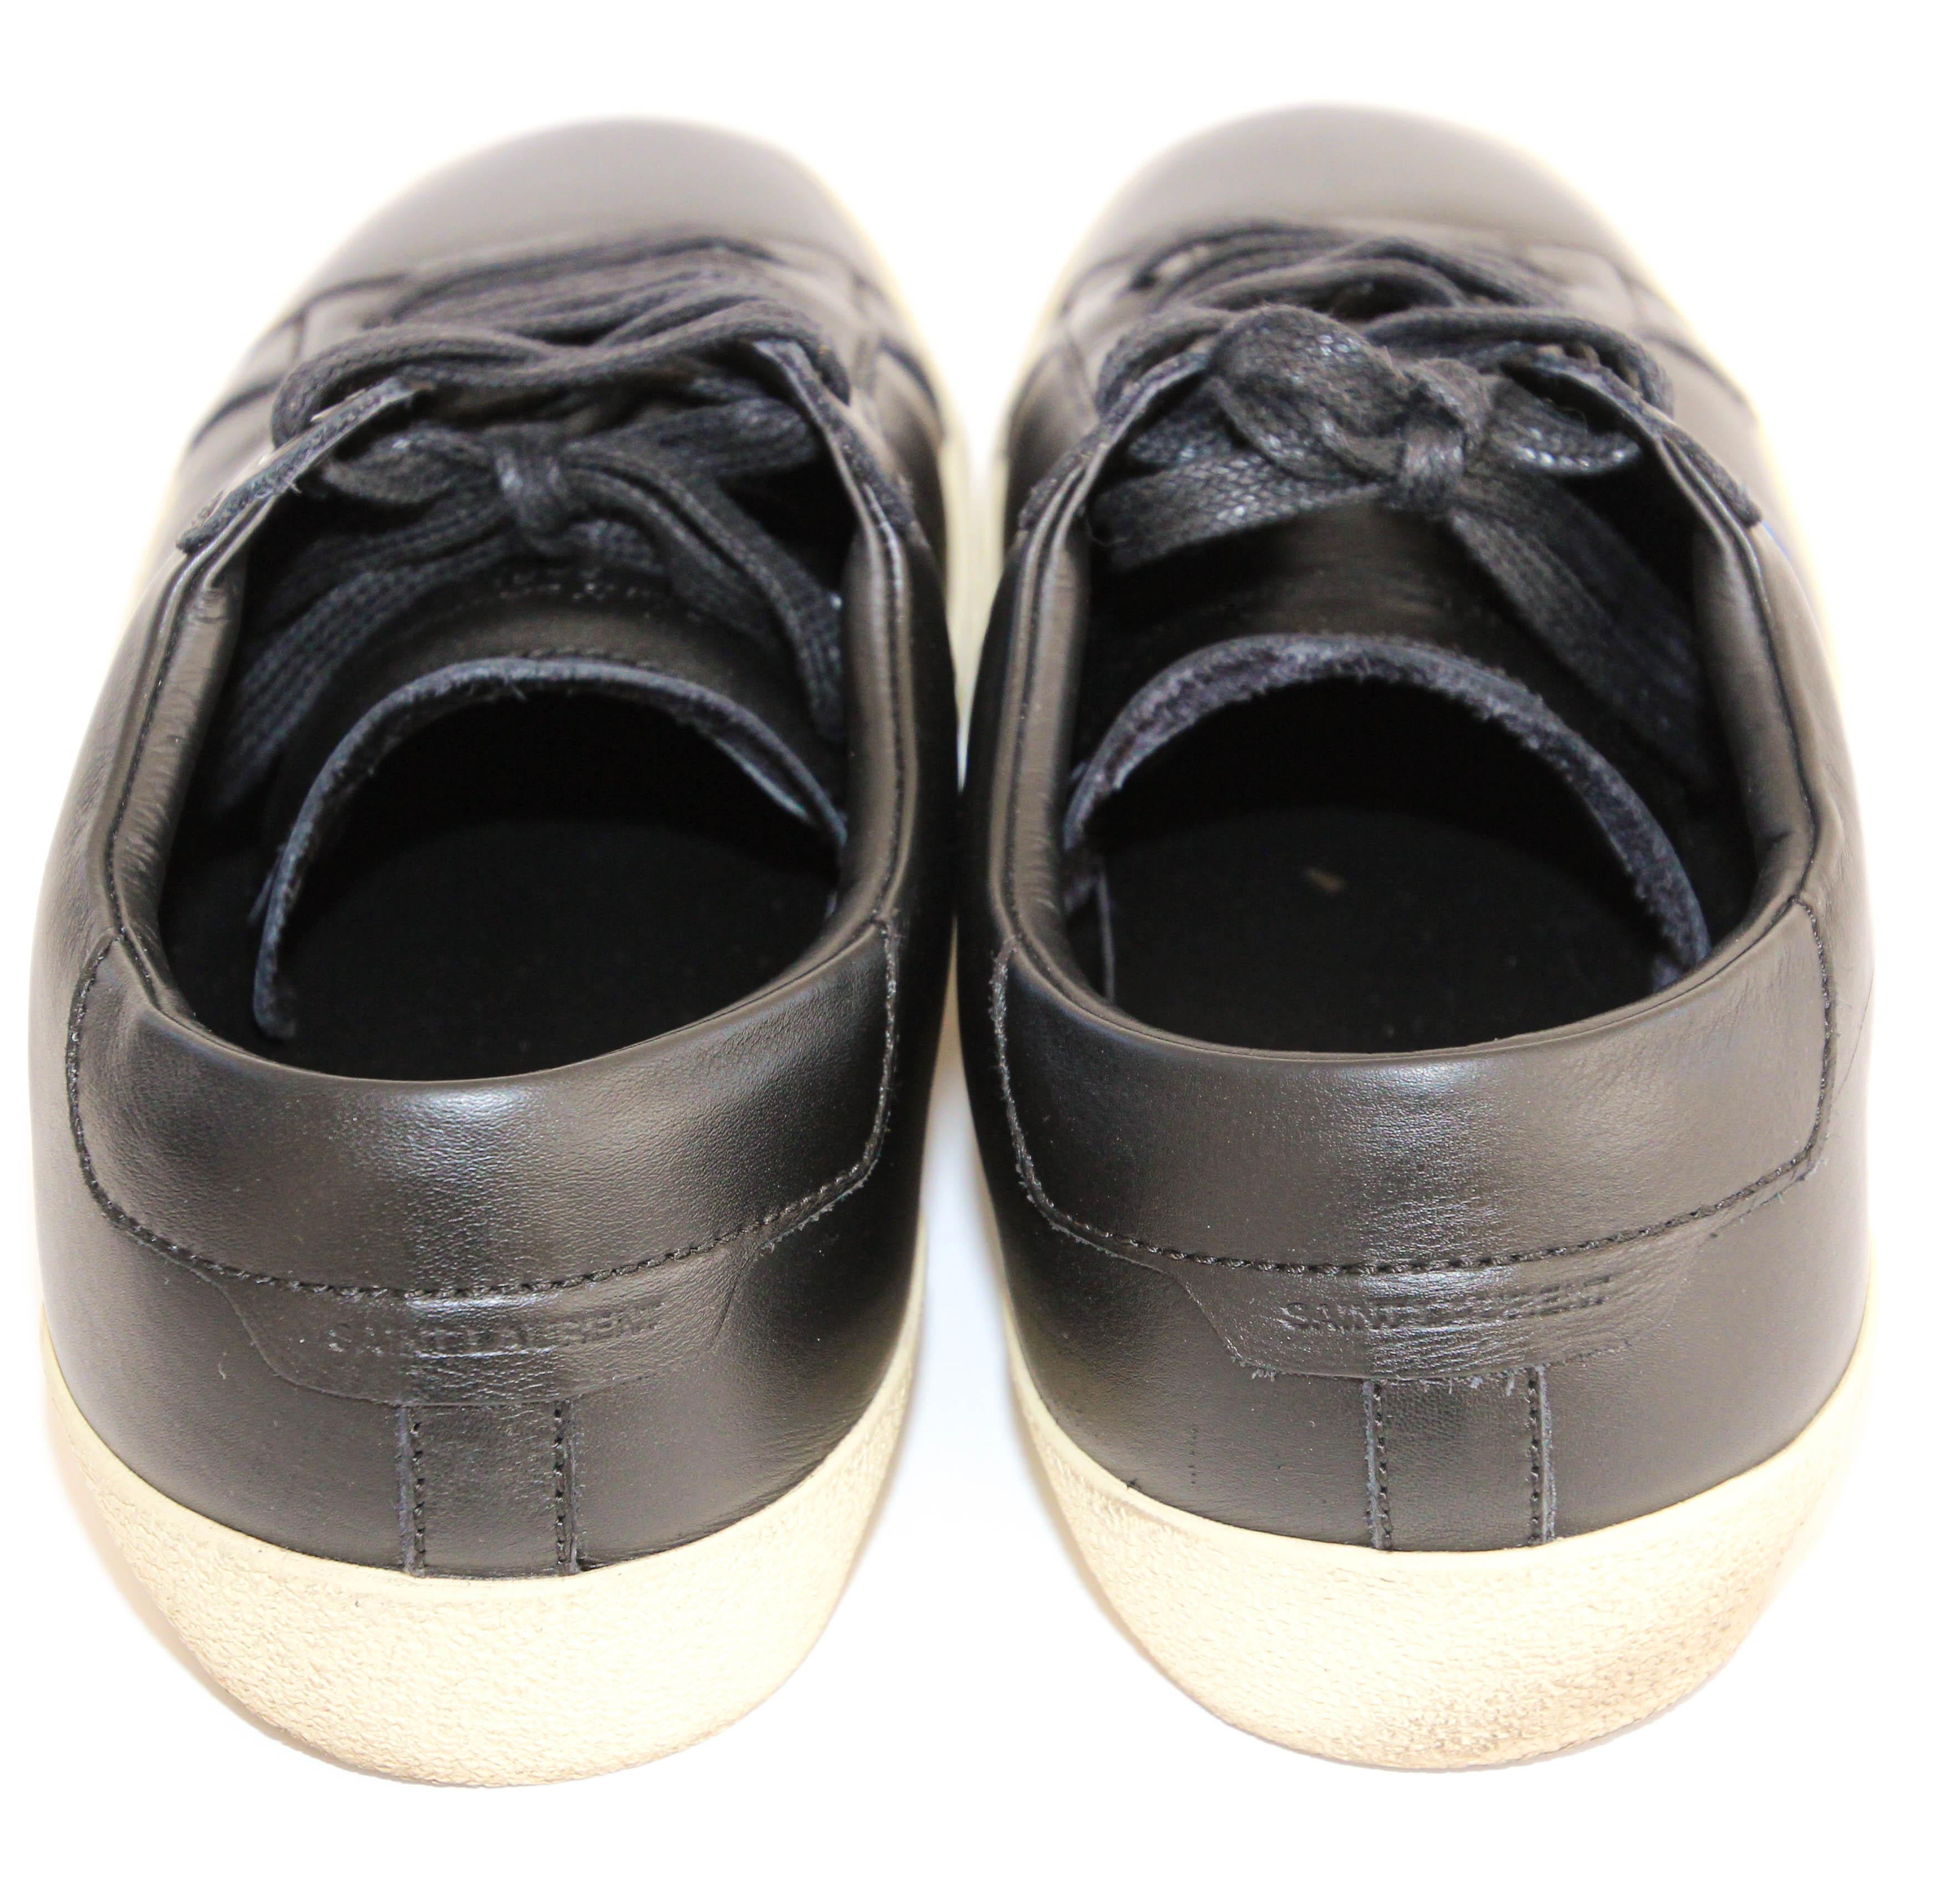 Saint Laurent Sneakers Athletic Shoes In Good Condition For Sale In North Hollywood, CA